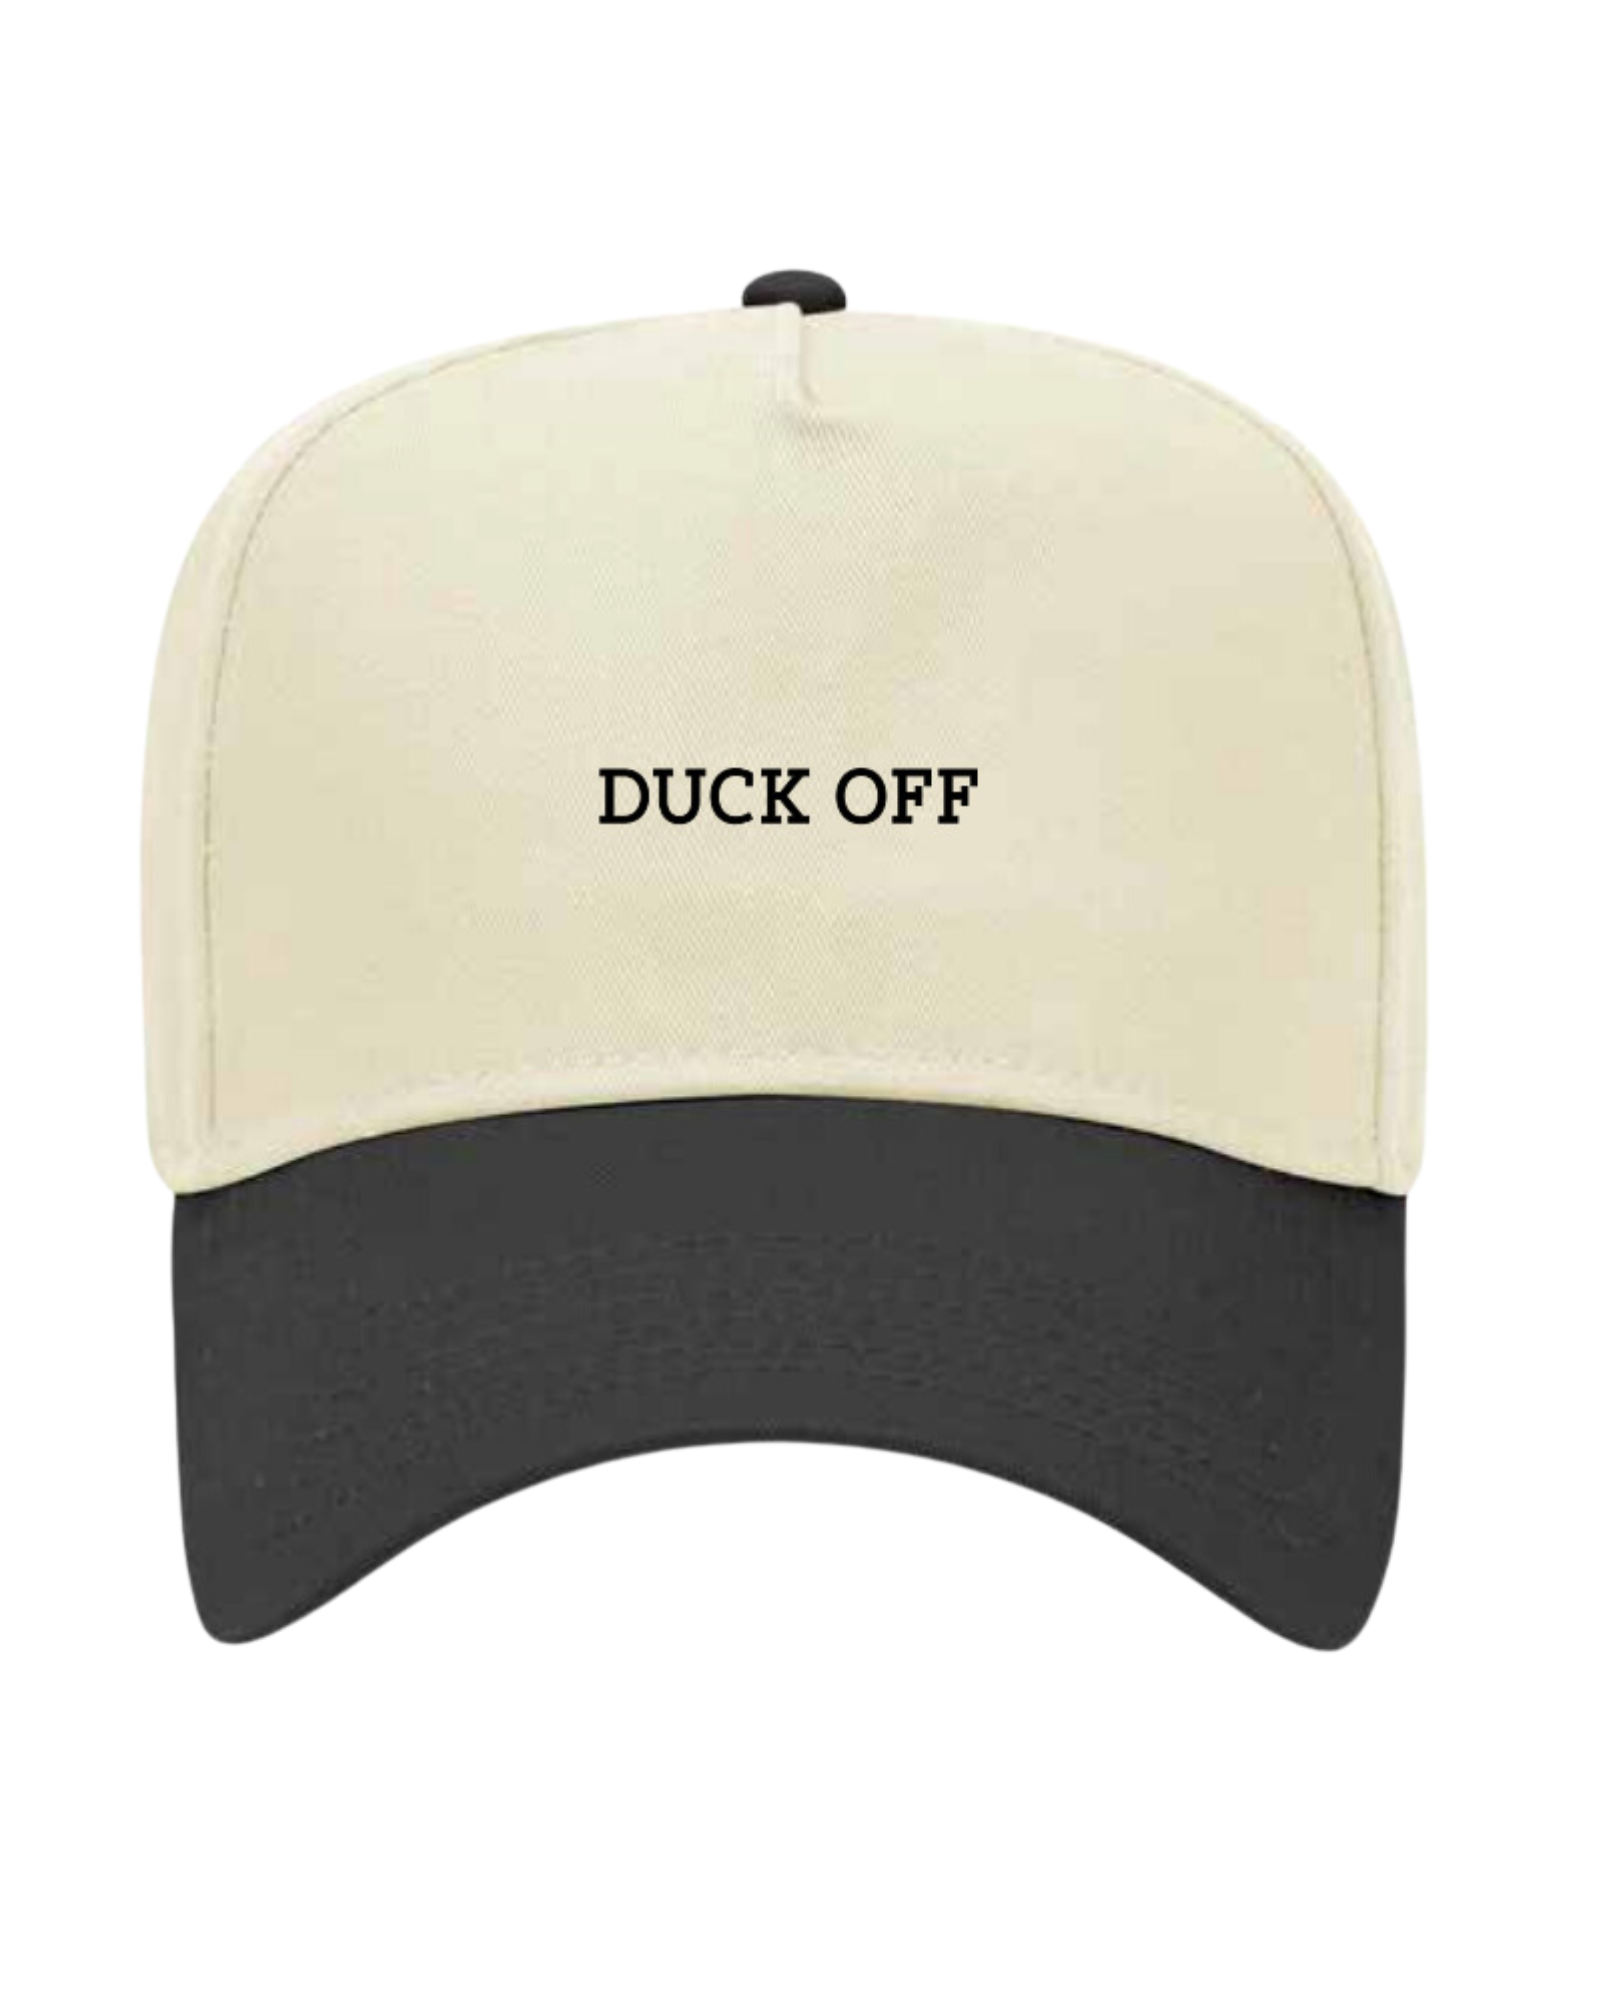 The Duck Off Hat